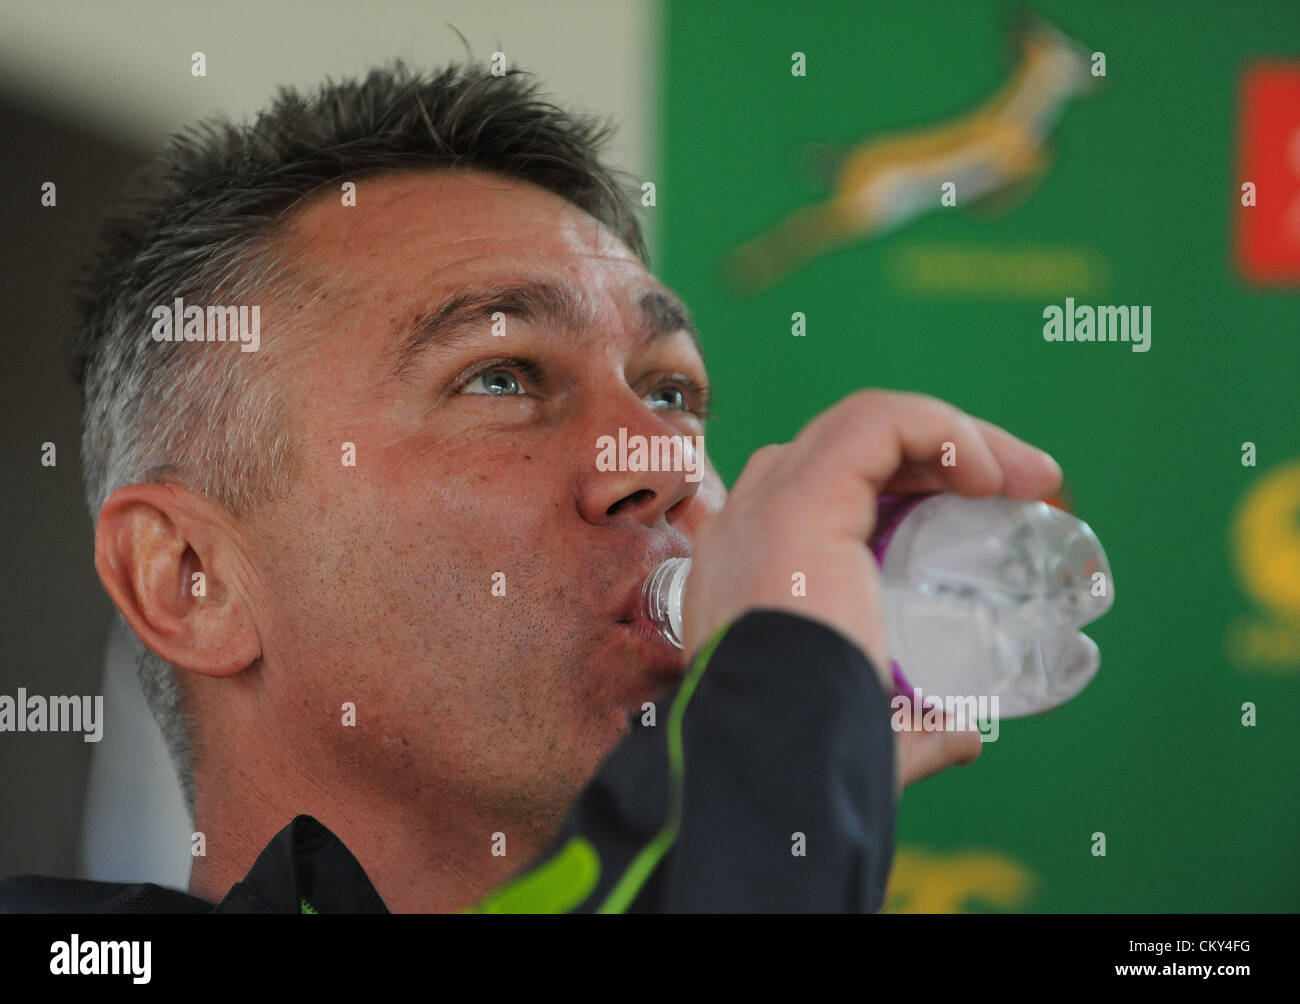 JOHANNESBURG, SOUTH AFRICA - SEPTEMBER 01, Heyneke Meyer being interviewed during the South African national rugby team field session and media conference at KES on September 01, 2012 in Johannesburg, South Africa Photo by Duif du Toit / Gallo Images Stock Photo